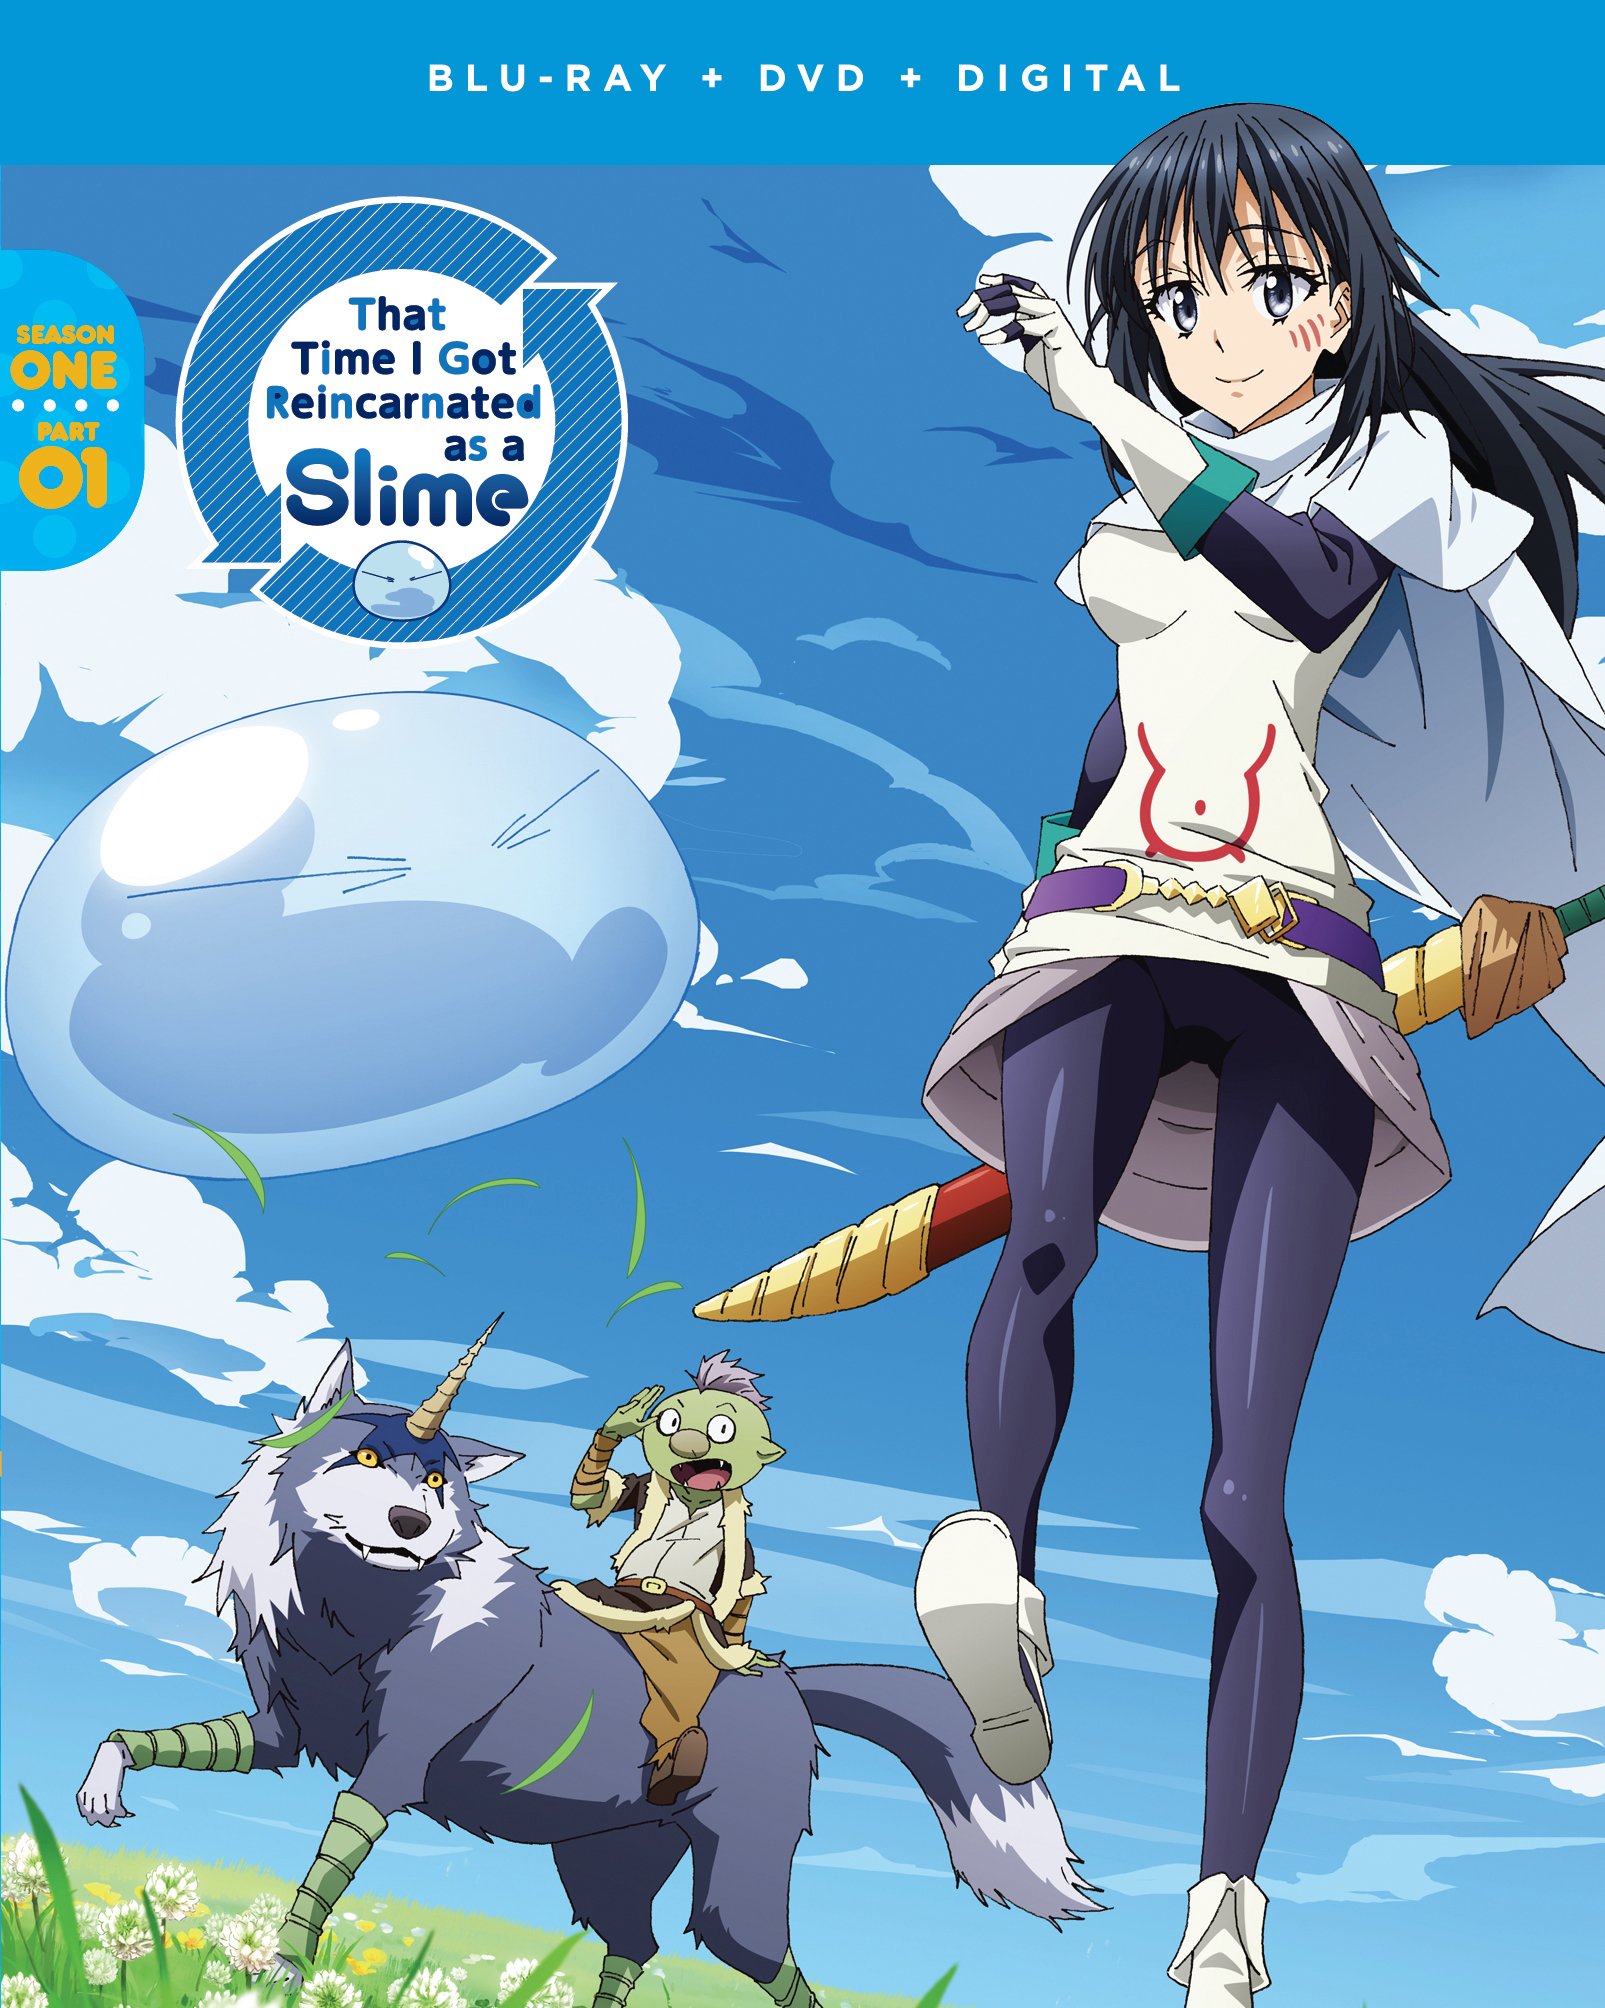  'That Time I Got Reincarnated as a Slime